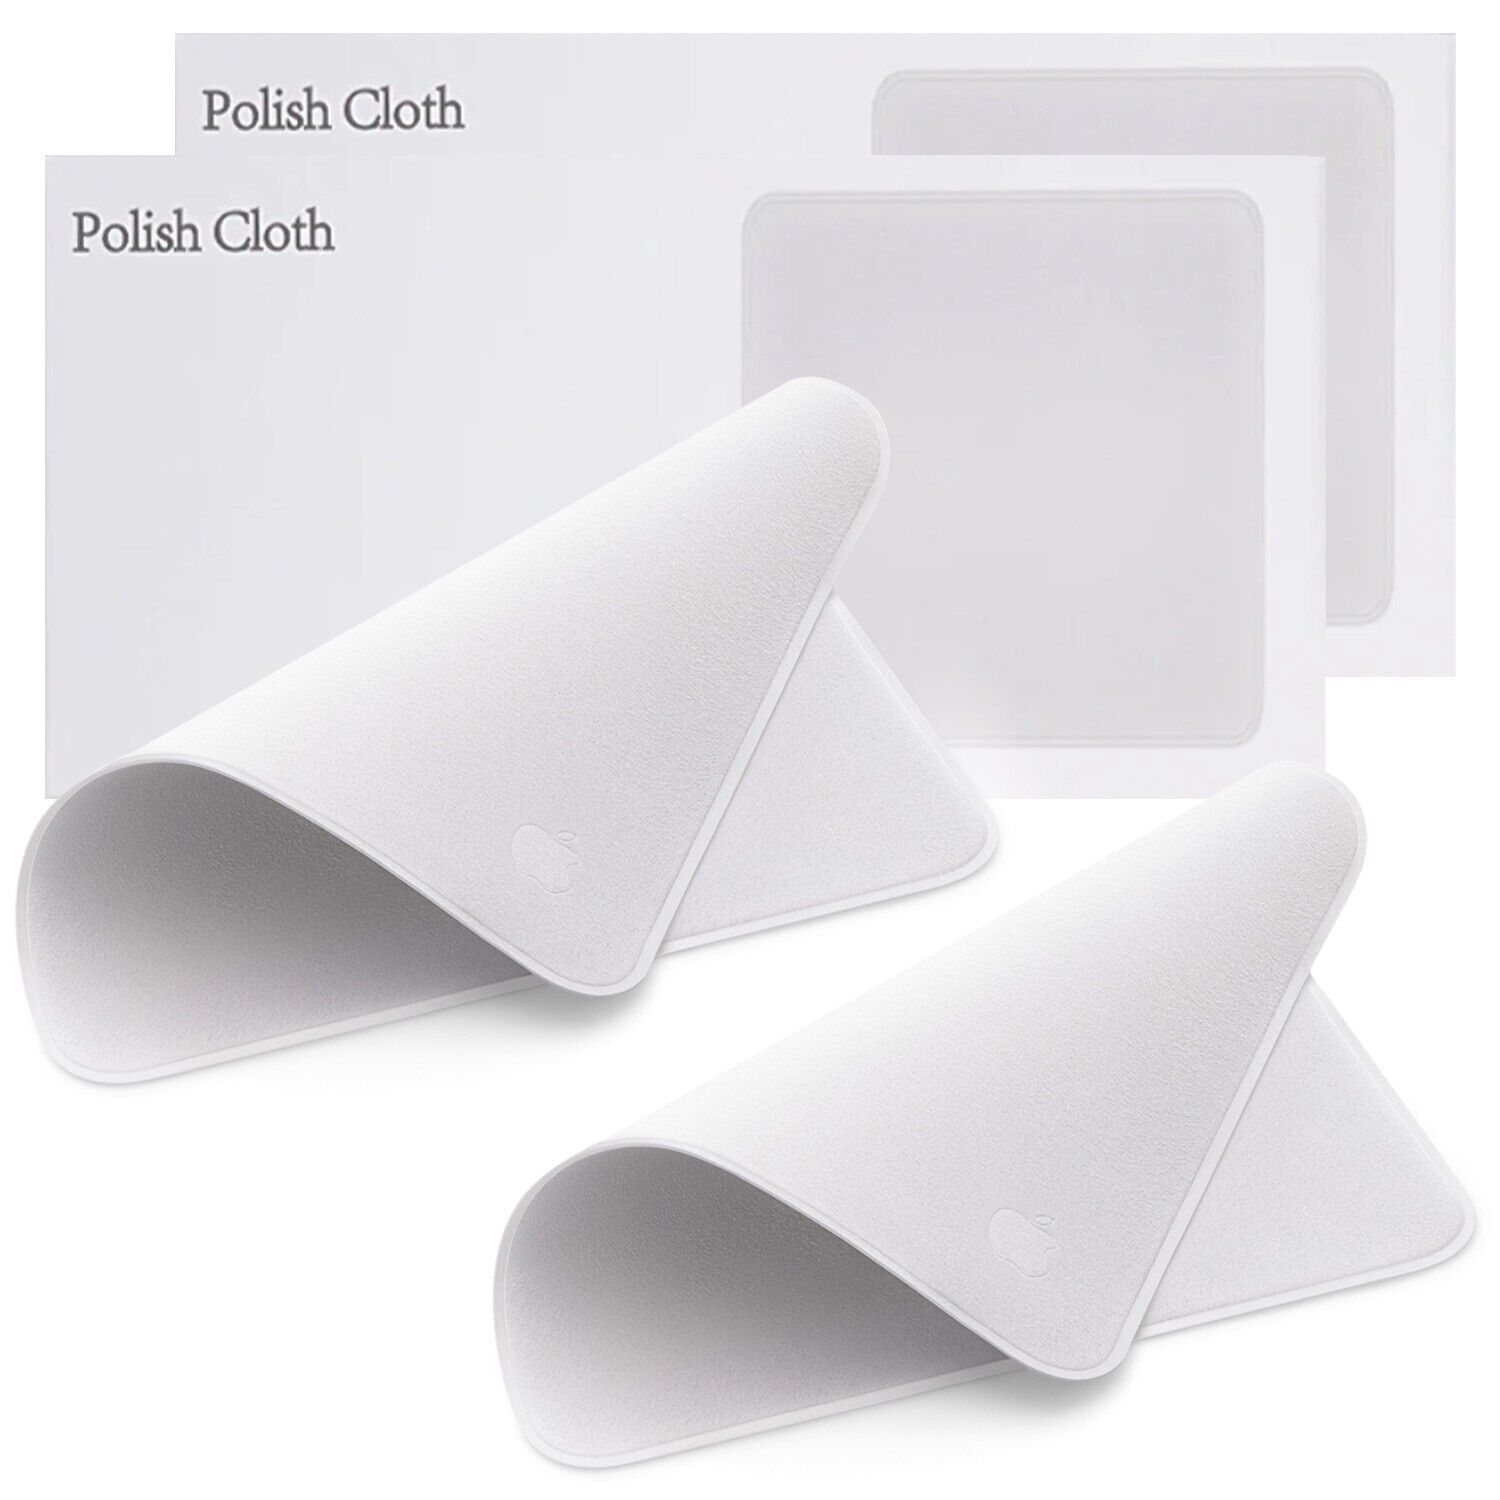 2-Pack Apple Polishing Cloth for iPhone, iPad, MacBook, Apple Watch and Other